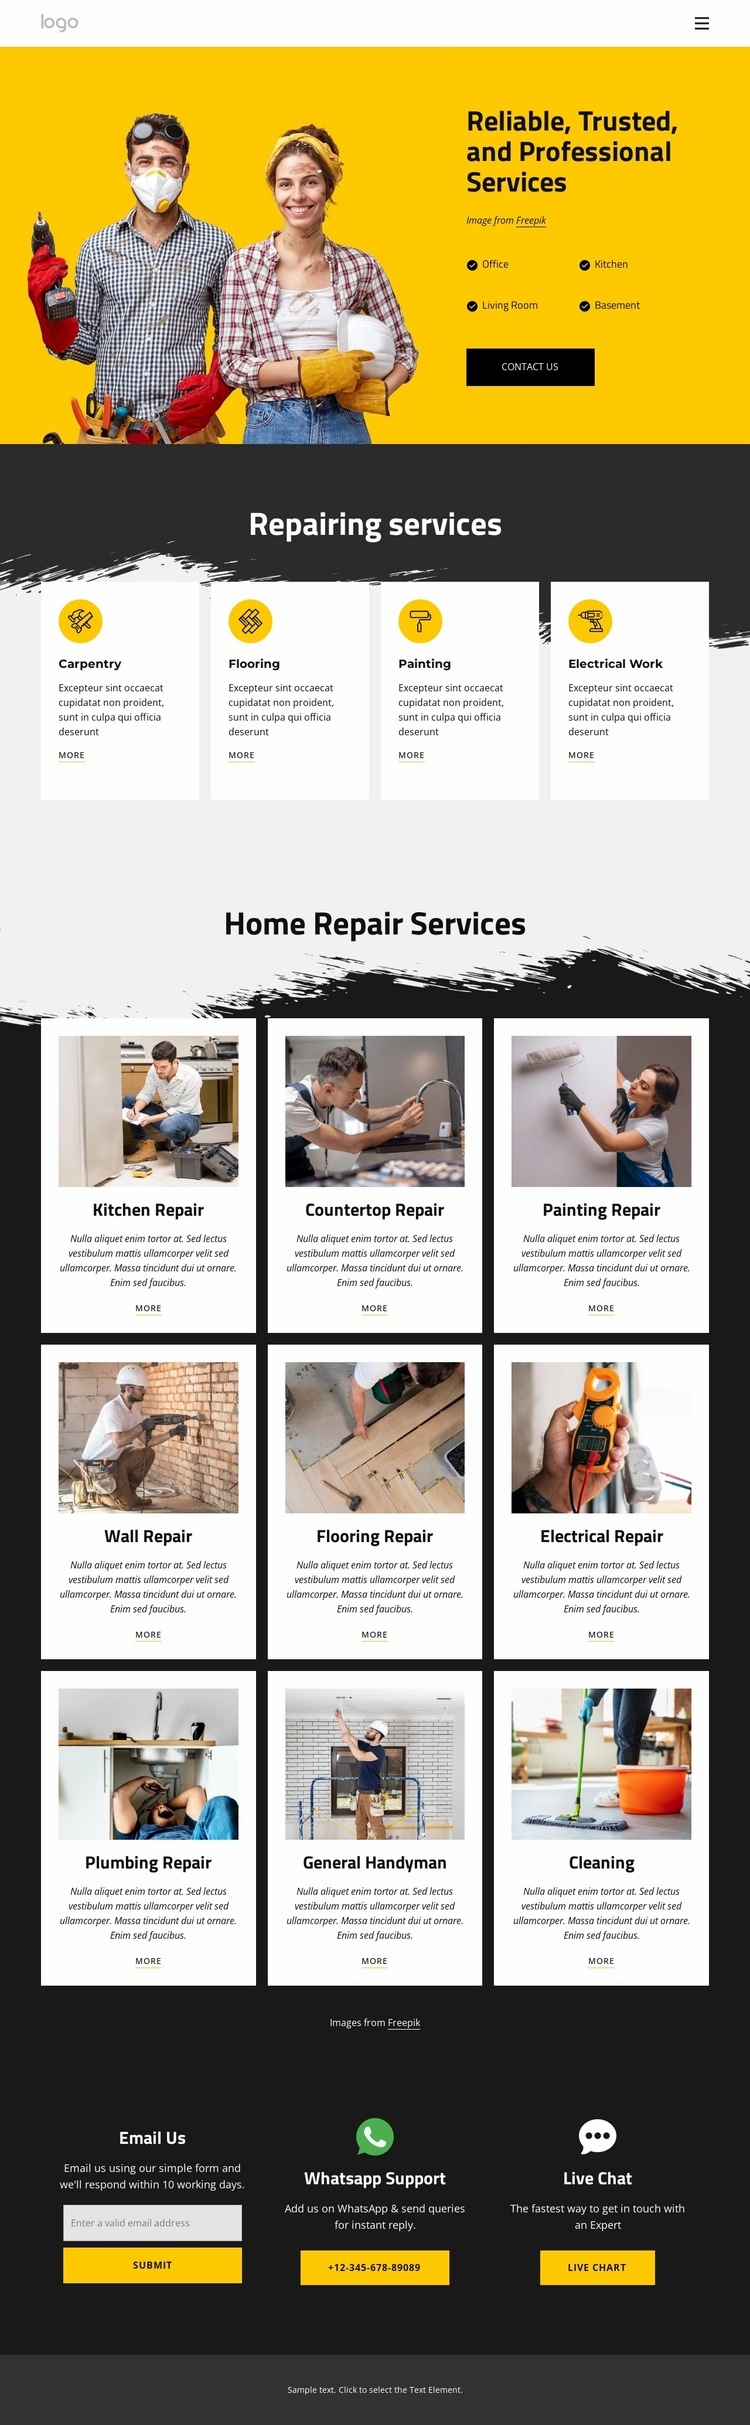 Handyman services and home repair Web Page Design